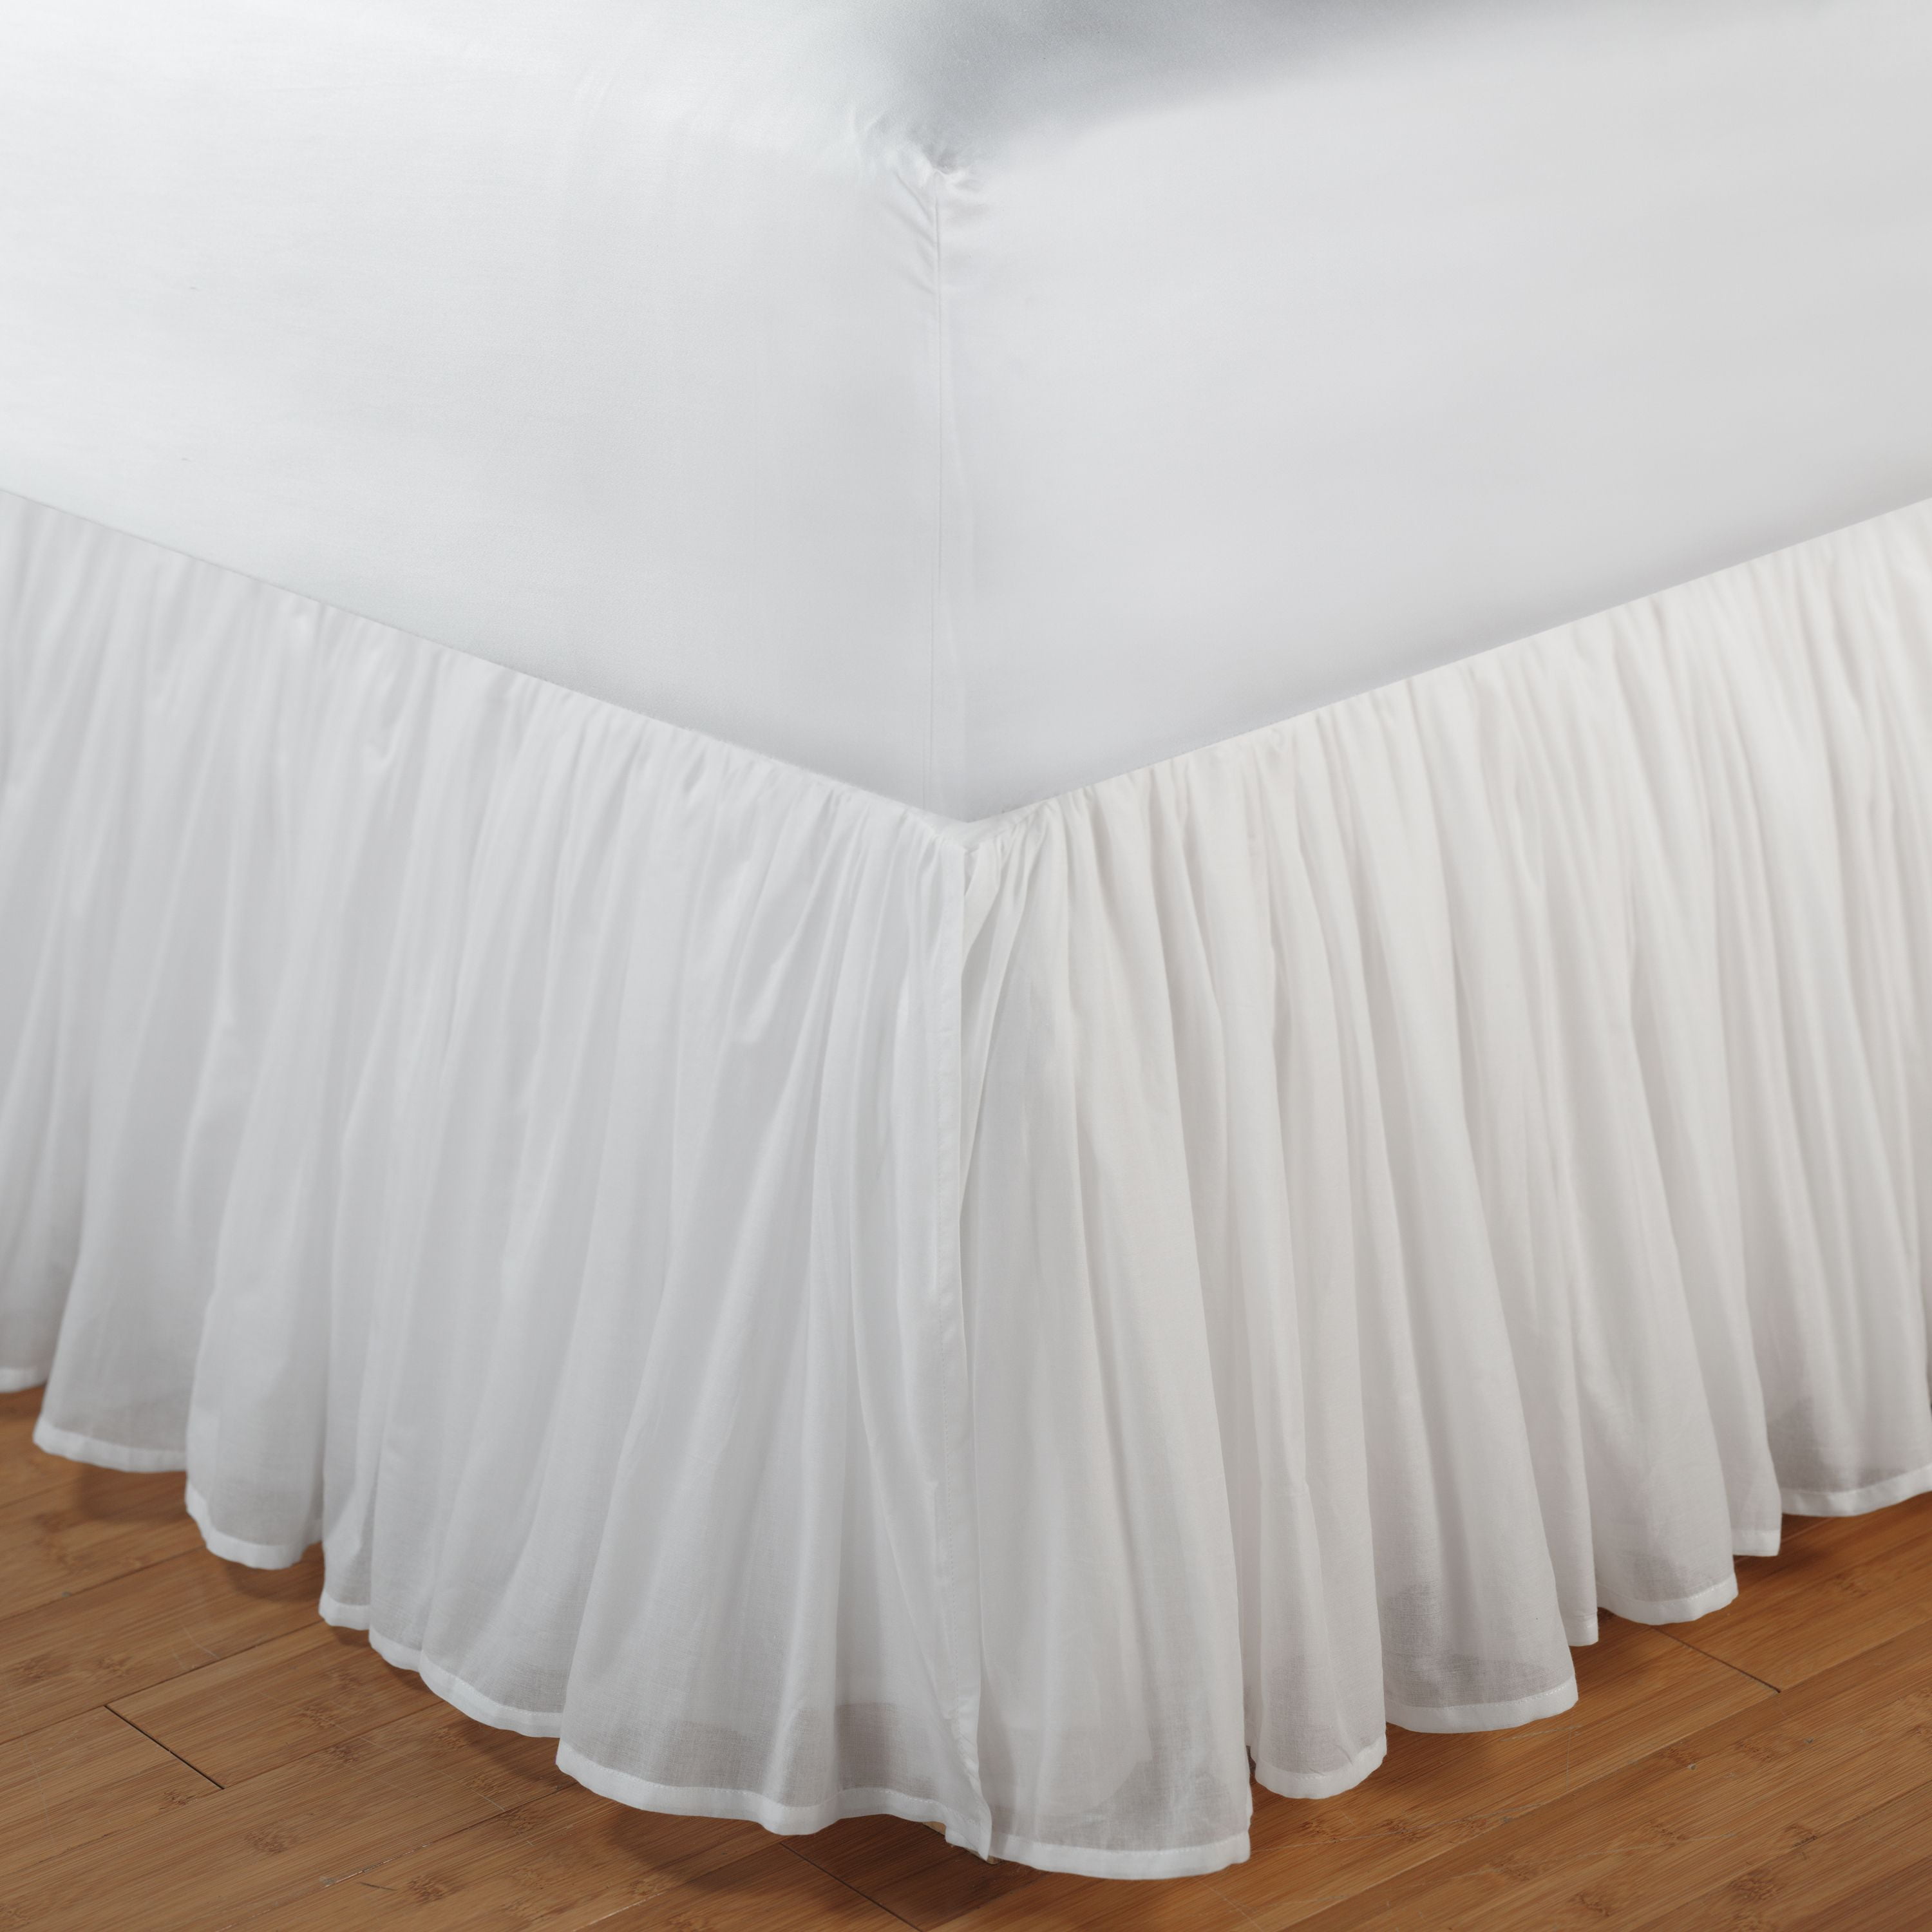 Solid White 400 TC Cotton Wrap Around Ruffle Bed Skirt All Size Drop Length Sale 